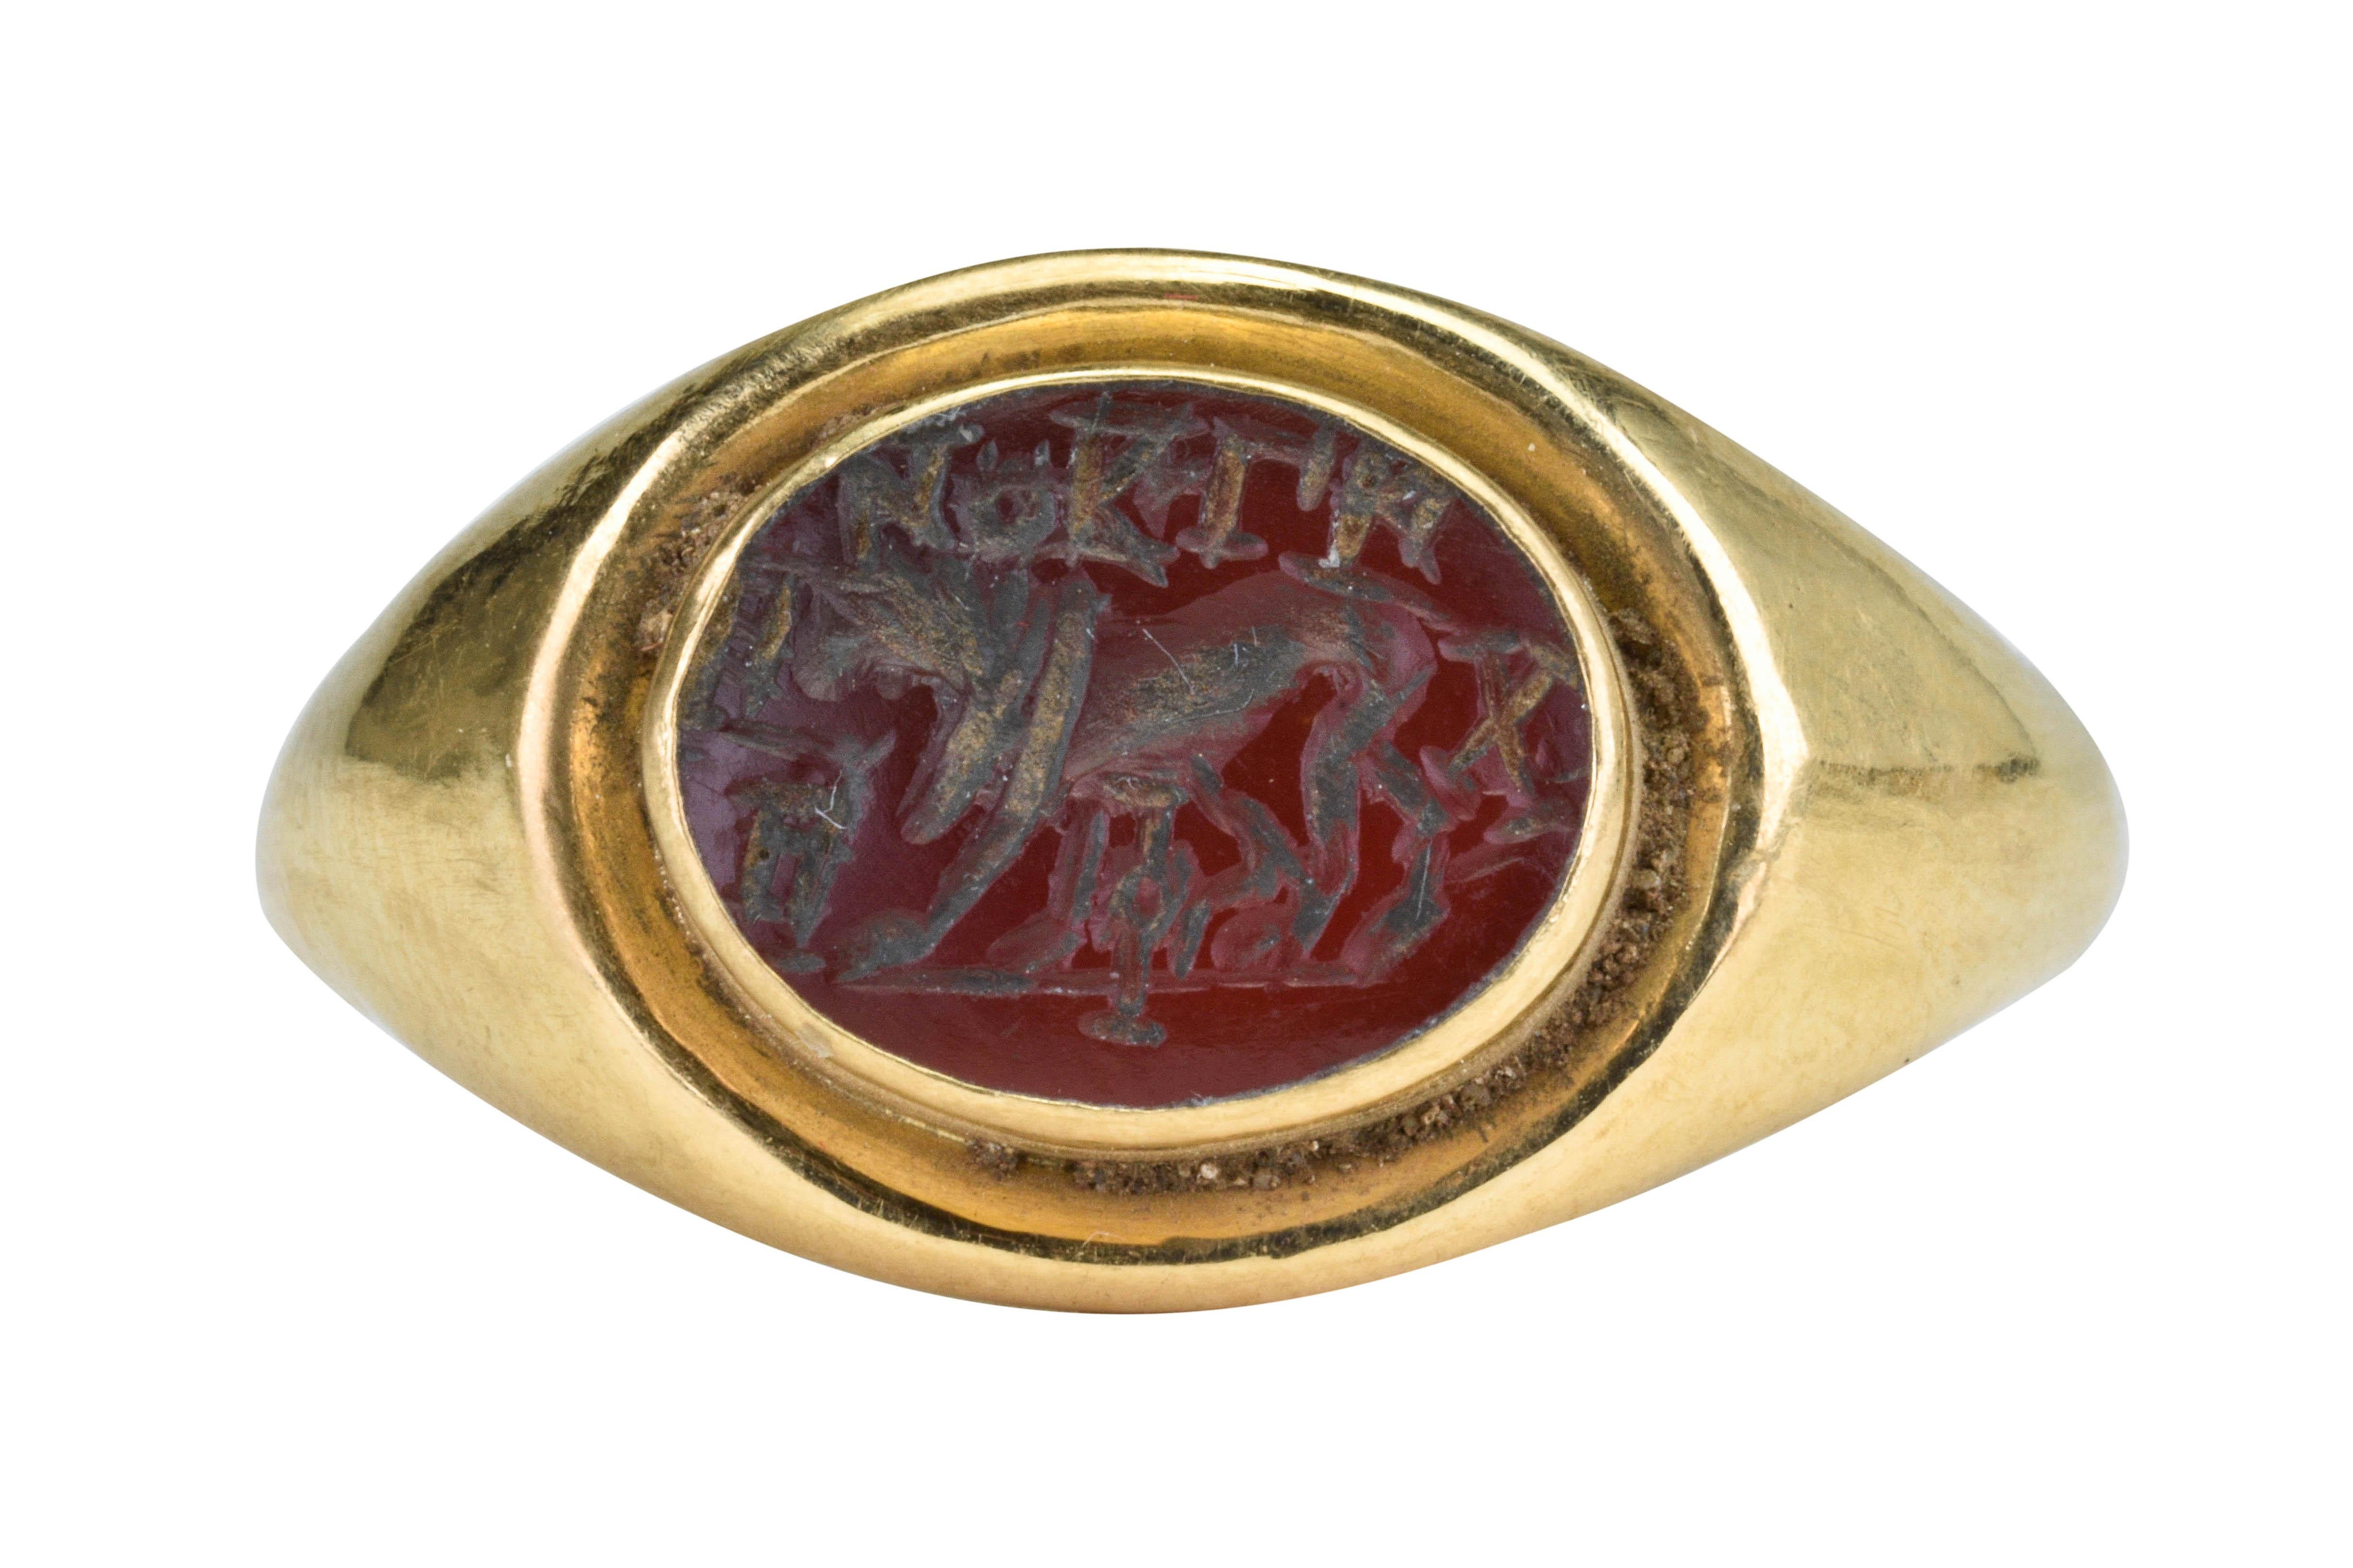 Ancient Roman Gold Signet Ring with Lion and Script

Ca. 100-300 AD

An Ancient Roman gold finger ring composed of a carinated-section round hoop rising to an oval bezel containing a carnelian intaglio depicting a walking lion on a baseline. The